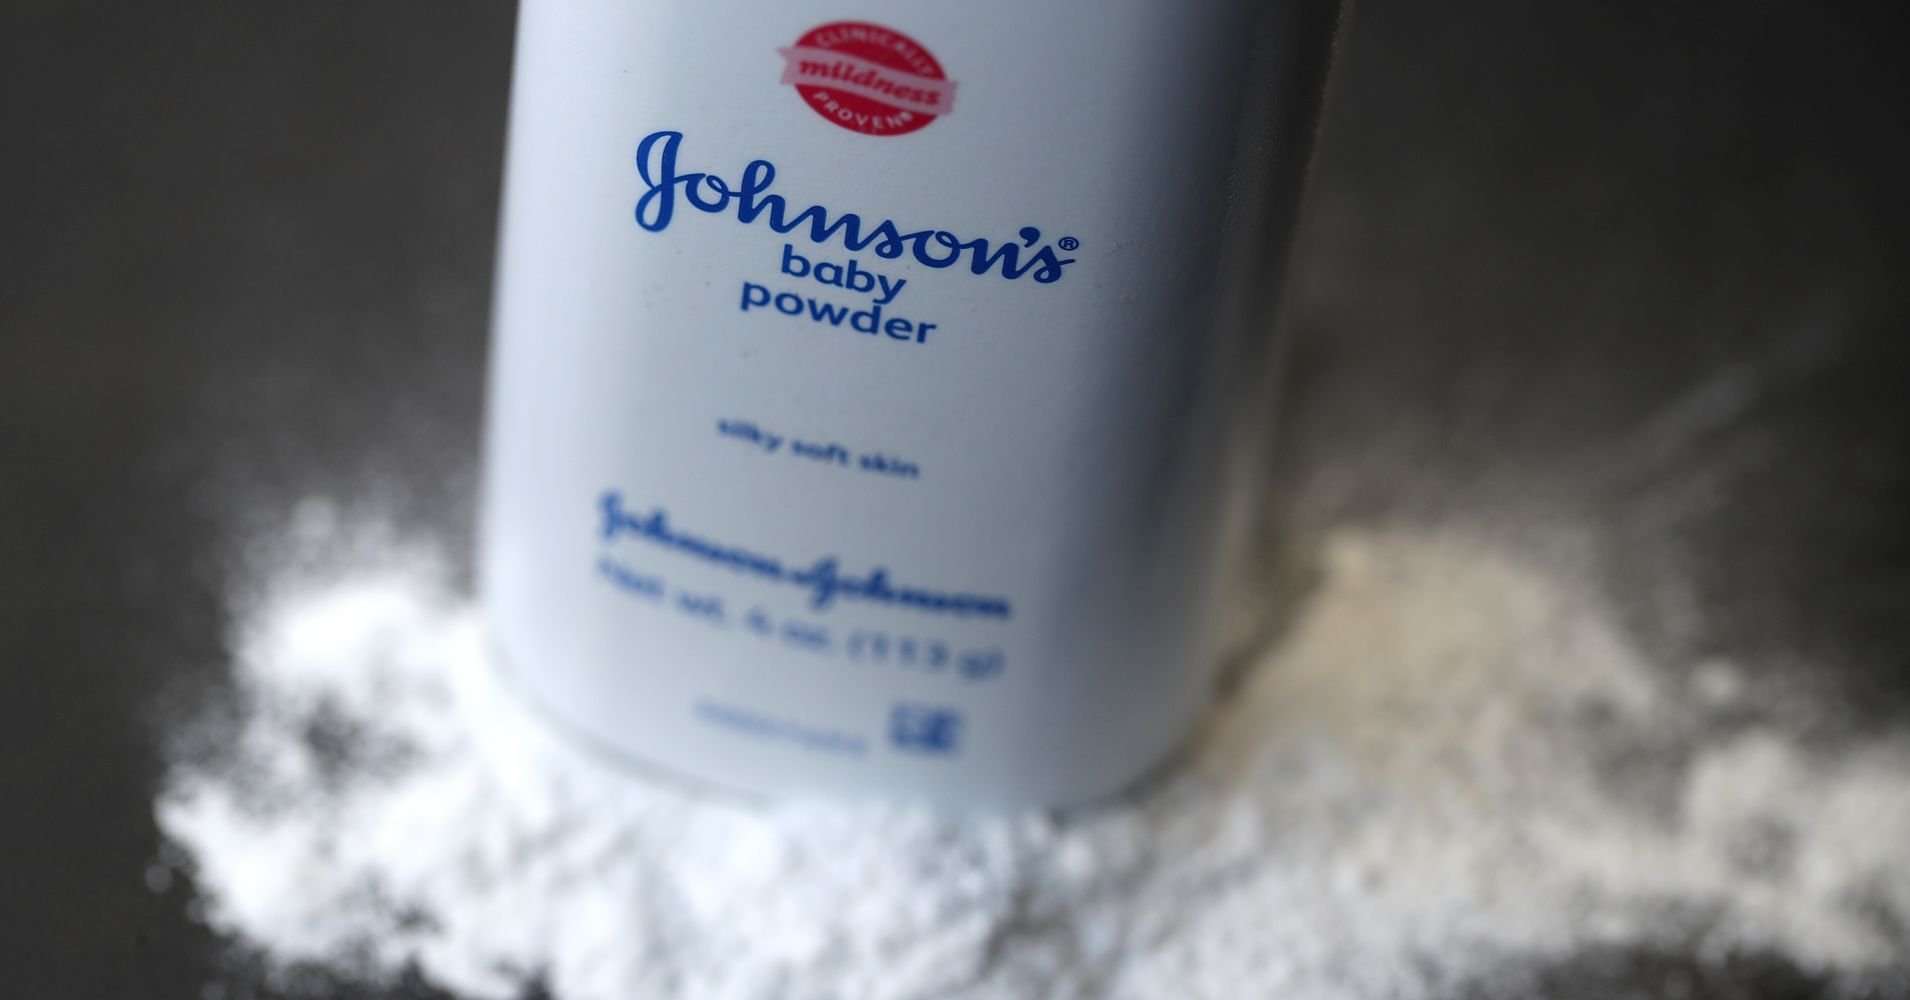 image for J&J reportedly knew for decades about asbestos in baby powder